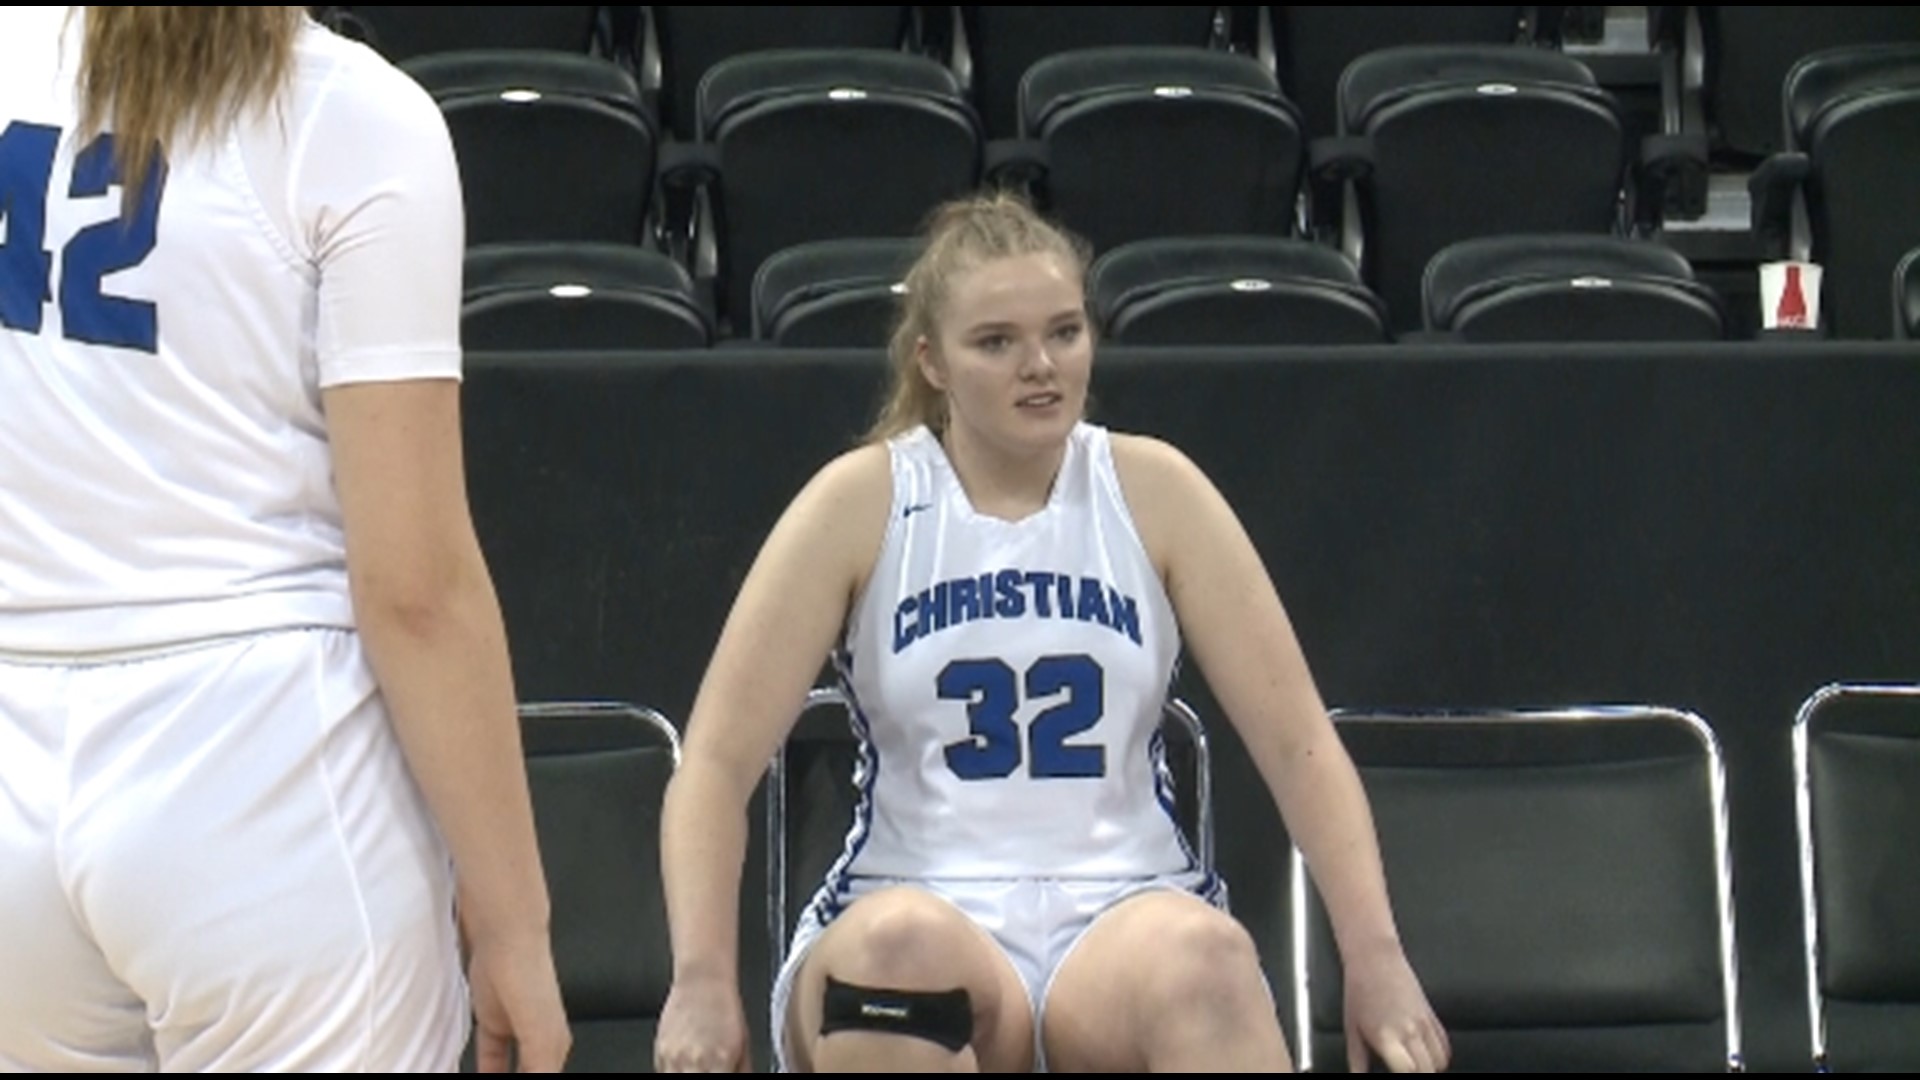 Highlights of the Mt. Vernon Christian girls 43-28 win over Waterville-Mansfield in the 1B State Semifinals (via KREM)